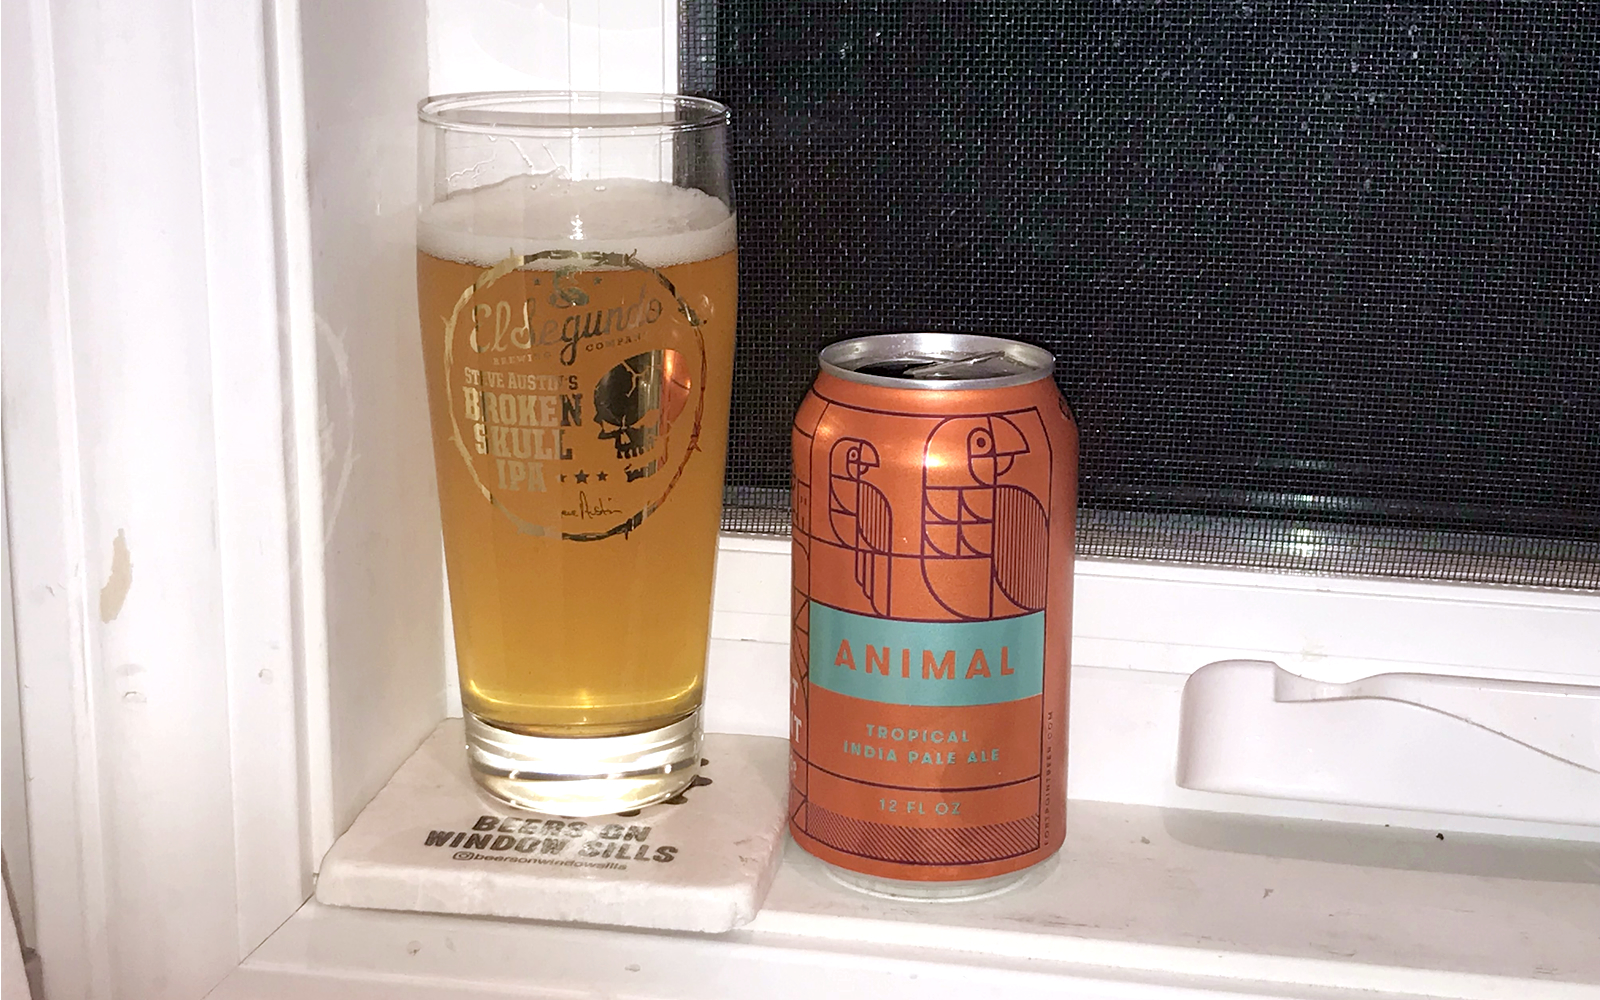 Fort Point Beer Company: Animal IPA